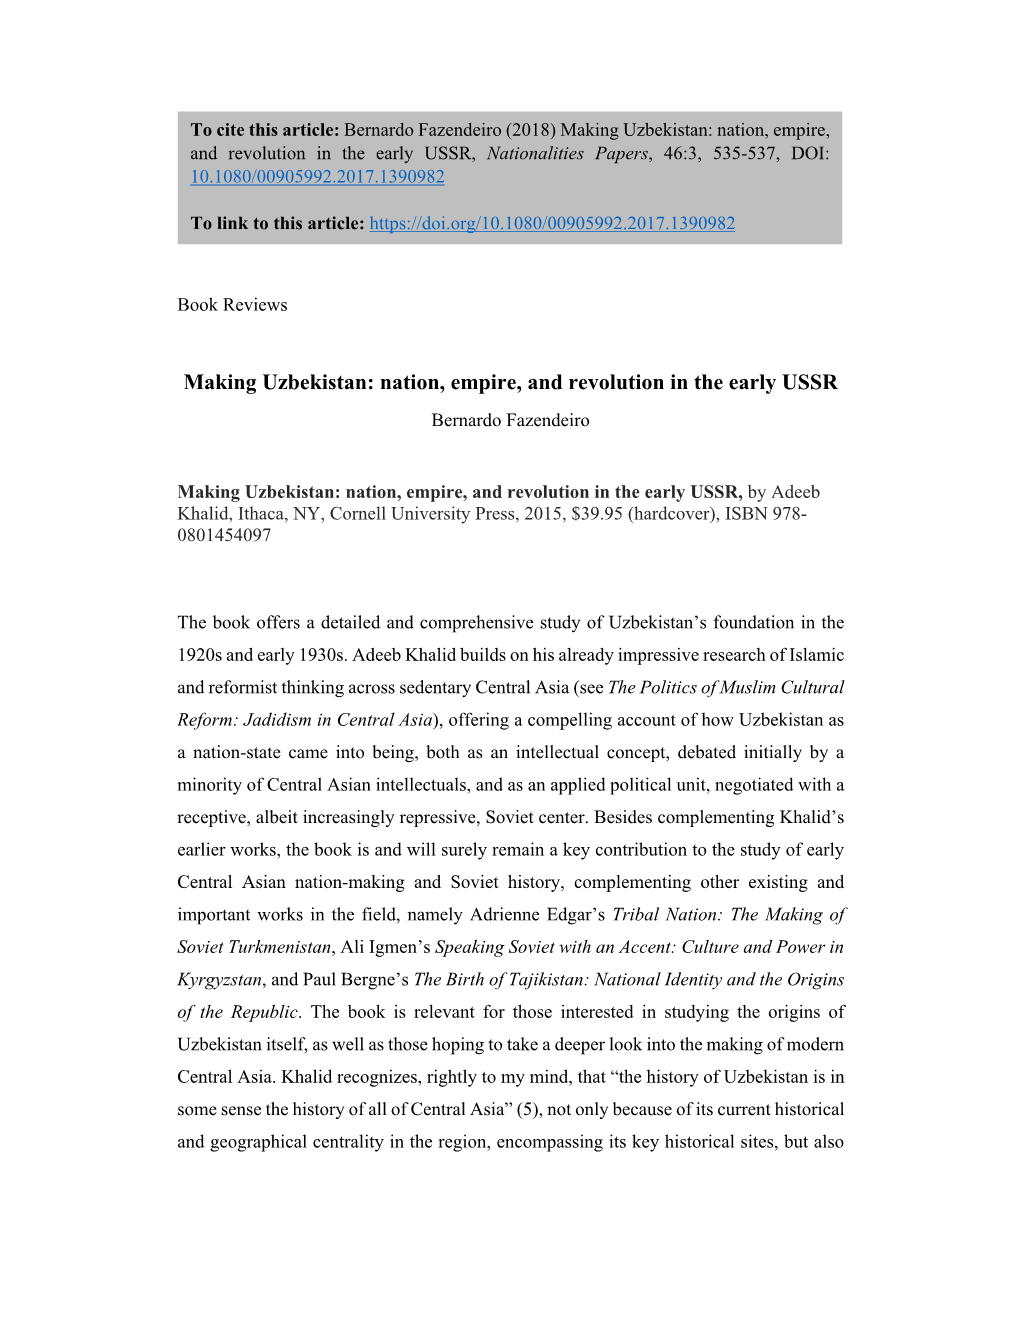 Making Uzbekistan: Nation, Empire, and Revolution in the Early USSR, Nationalities Papers, 46:3, 535-537, DOI: 10.1080/00905992.2017.1390982